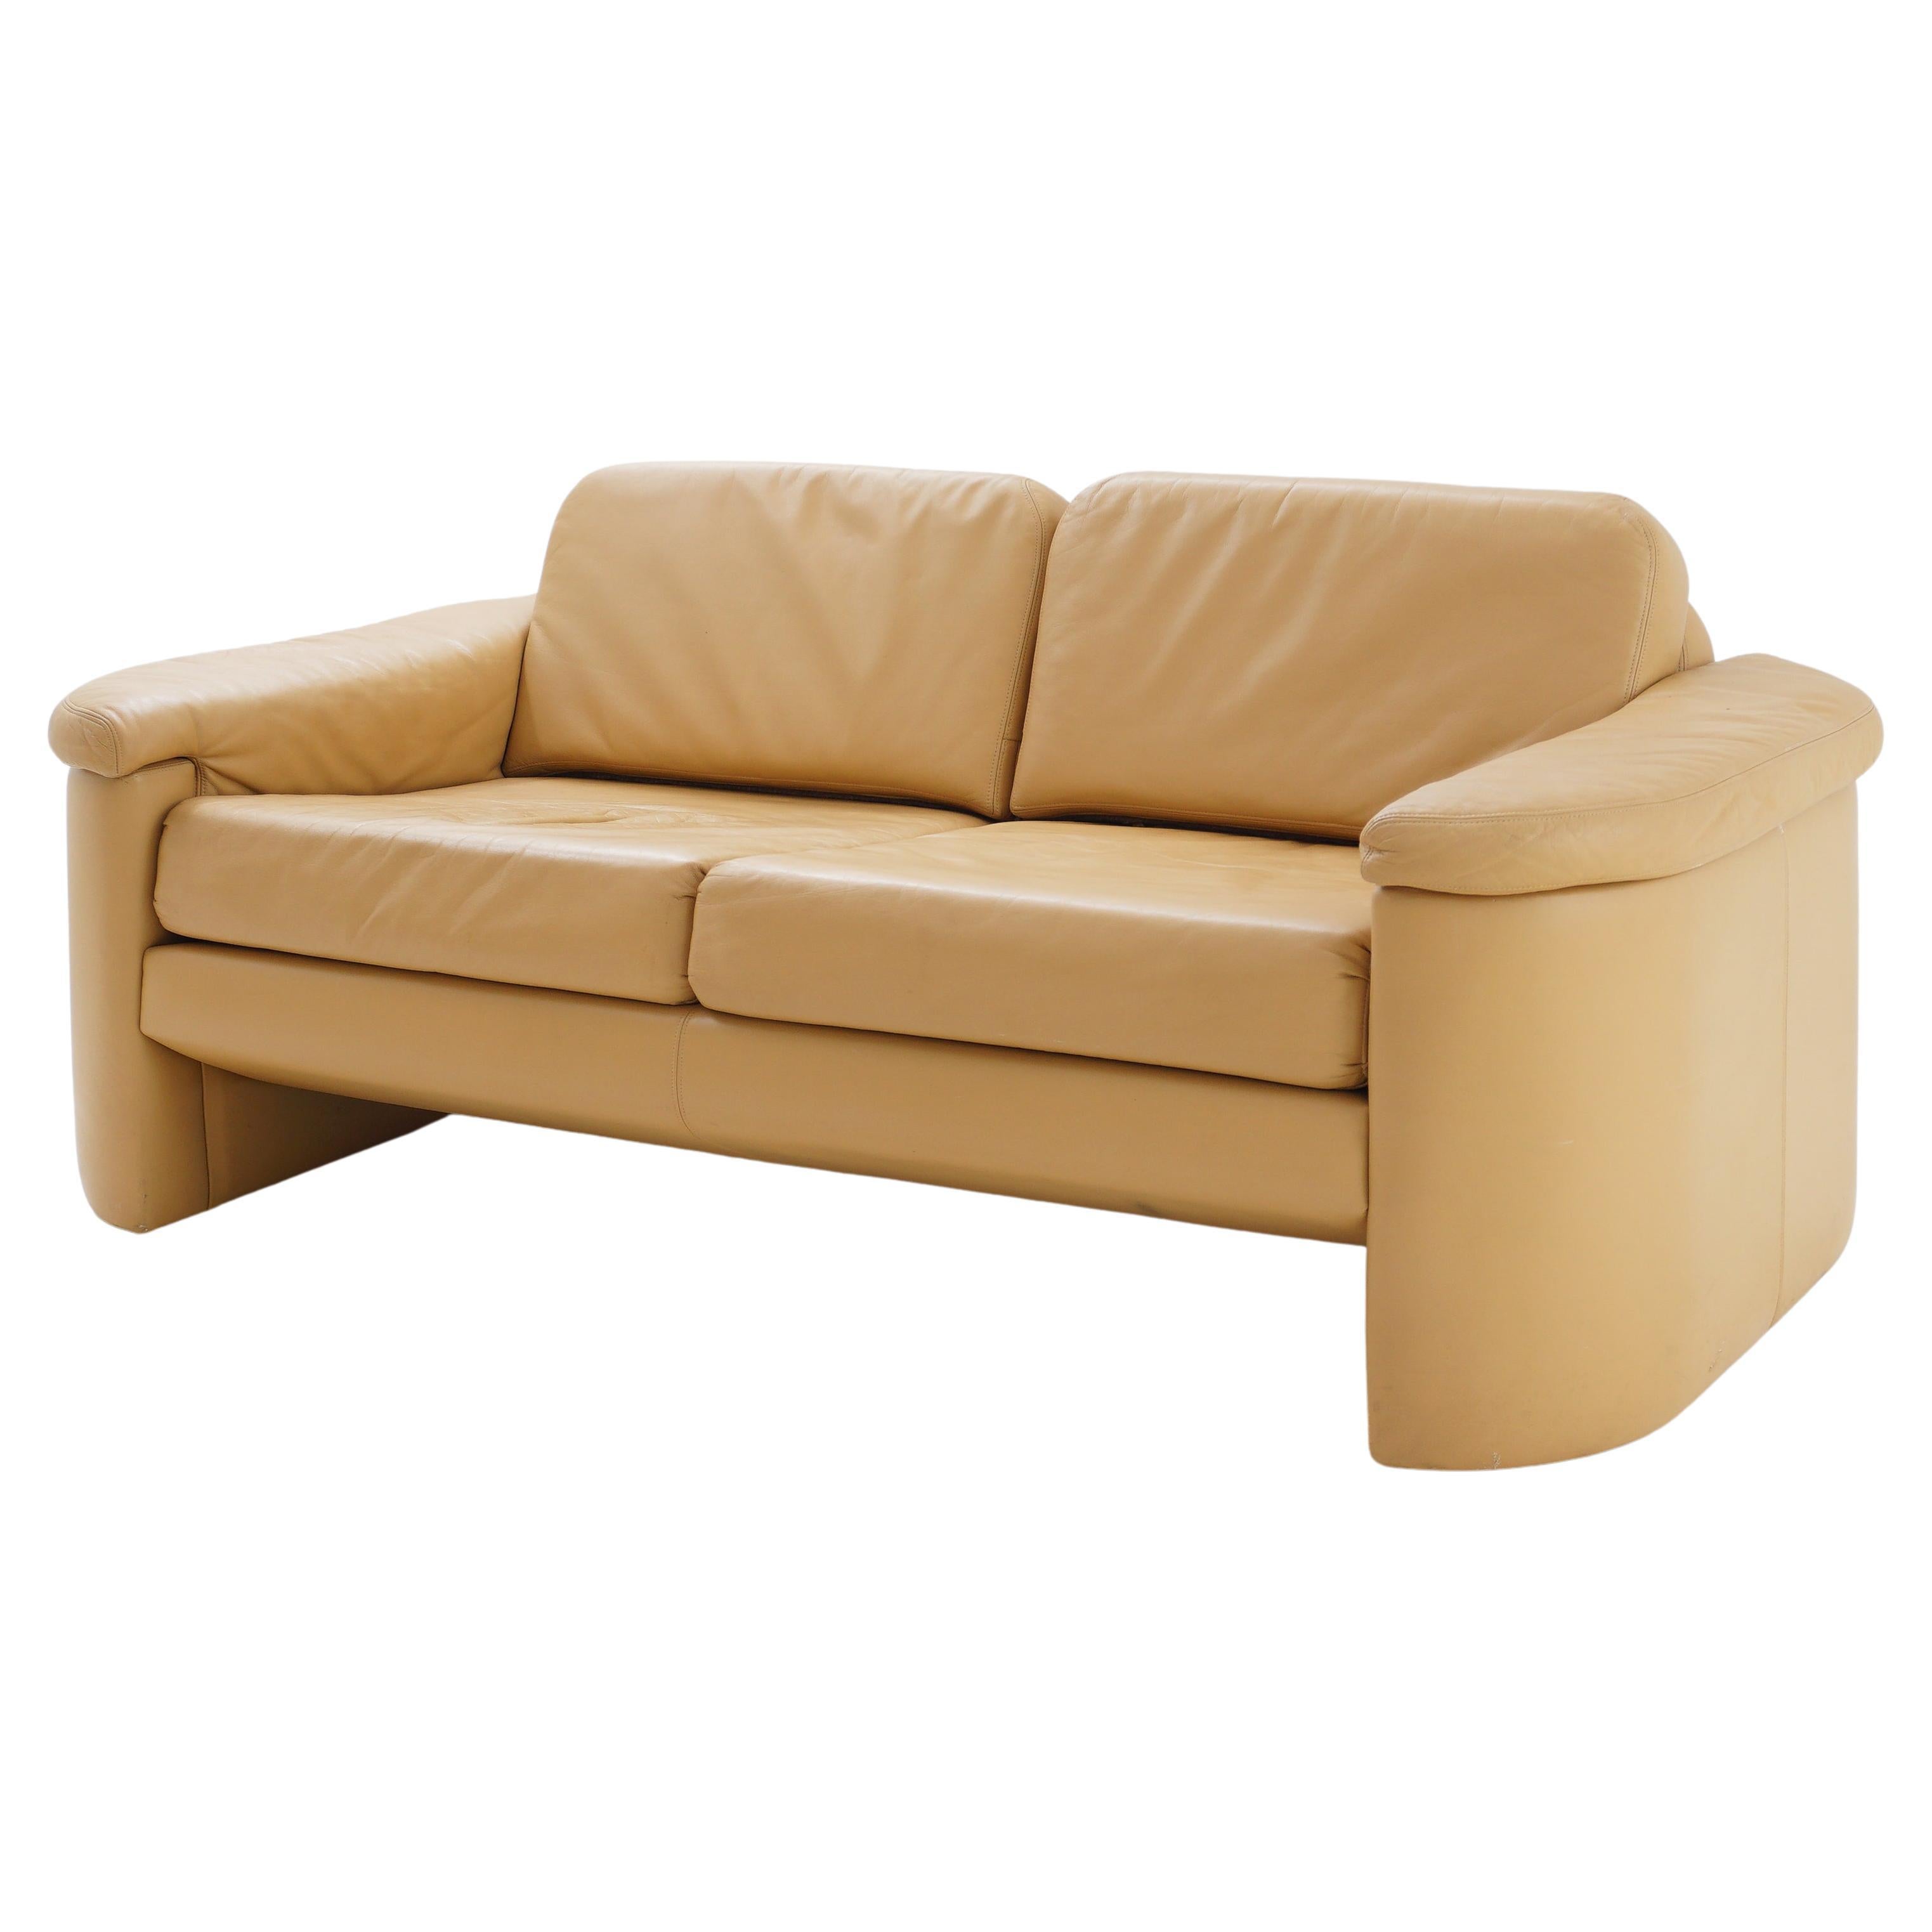 A nod to the versatility that characterizes the postmodern design movement, this '90s leather loveseat by Brandrud is a subtle statement. The soft leather and warm neutral hue invite you to lounge in style and comfort. Sit back, relax, and revel in